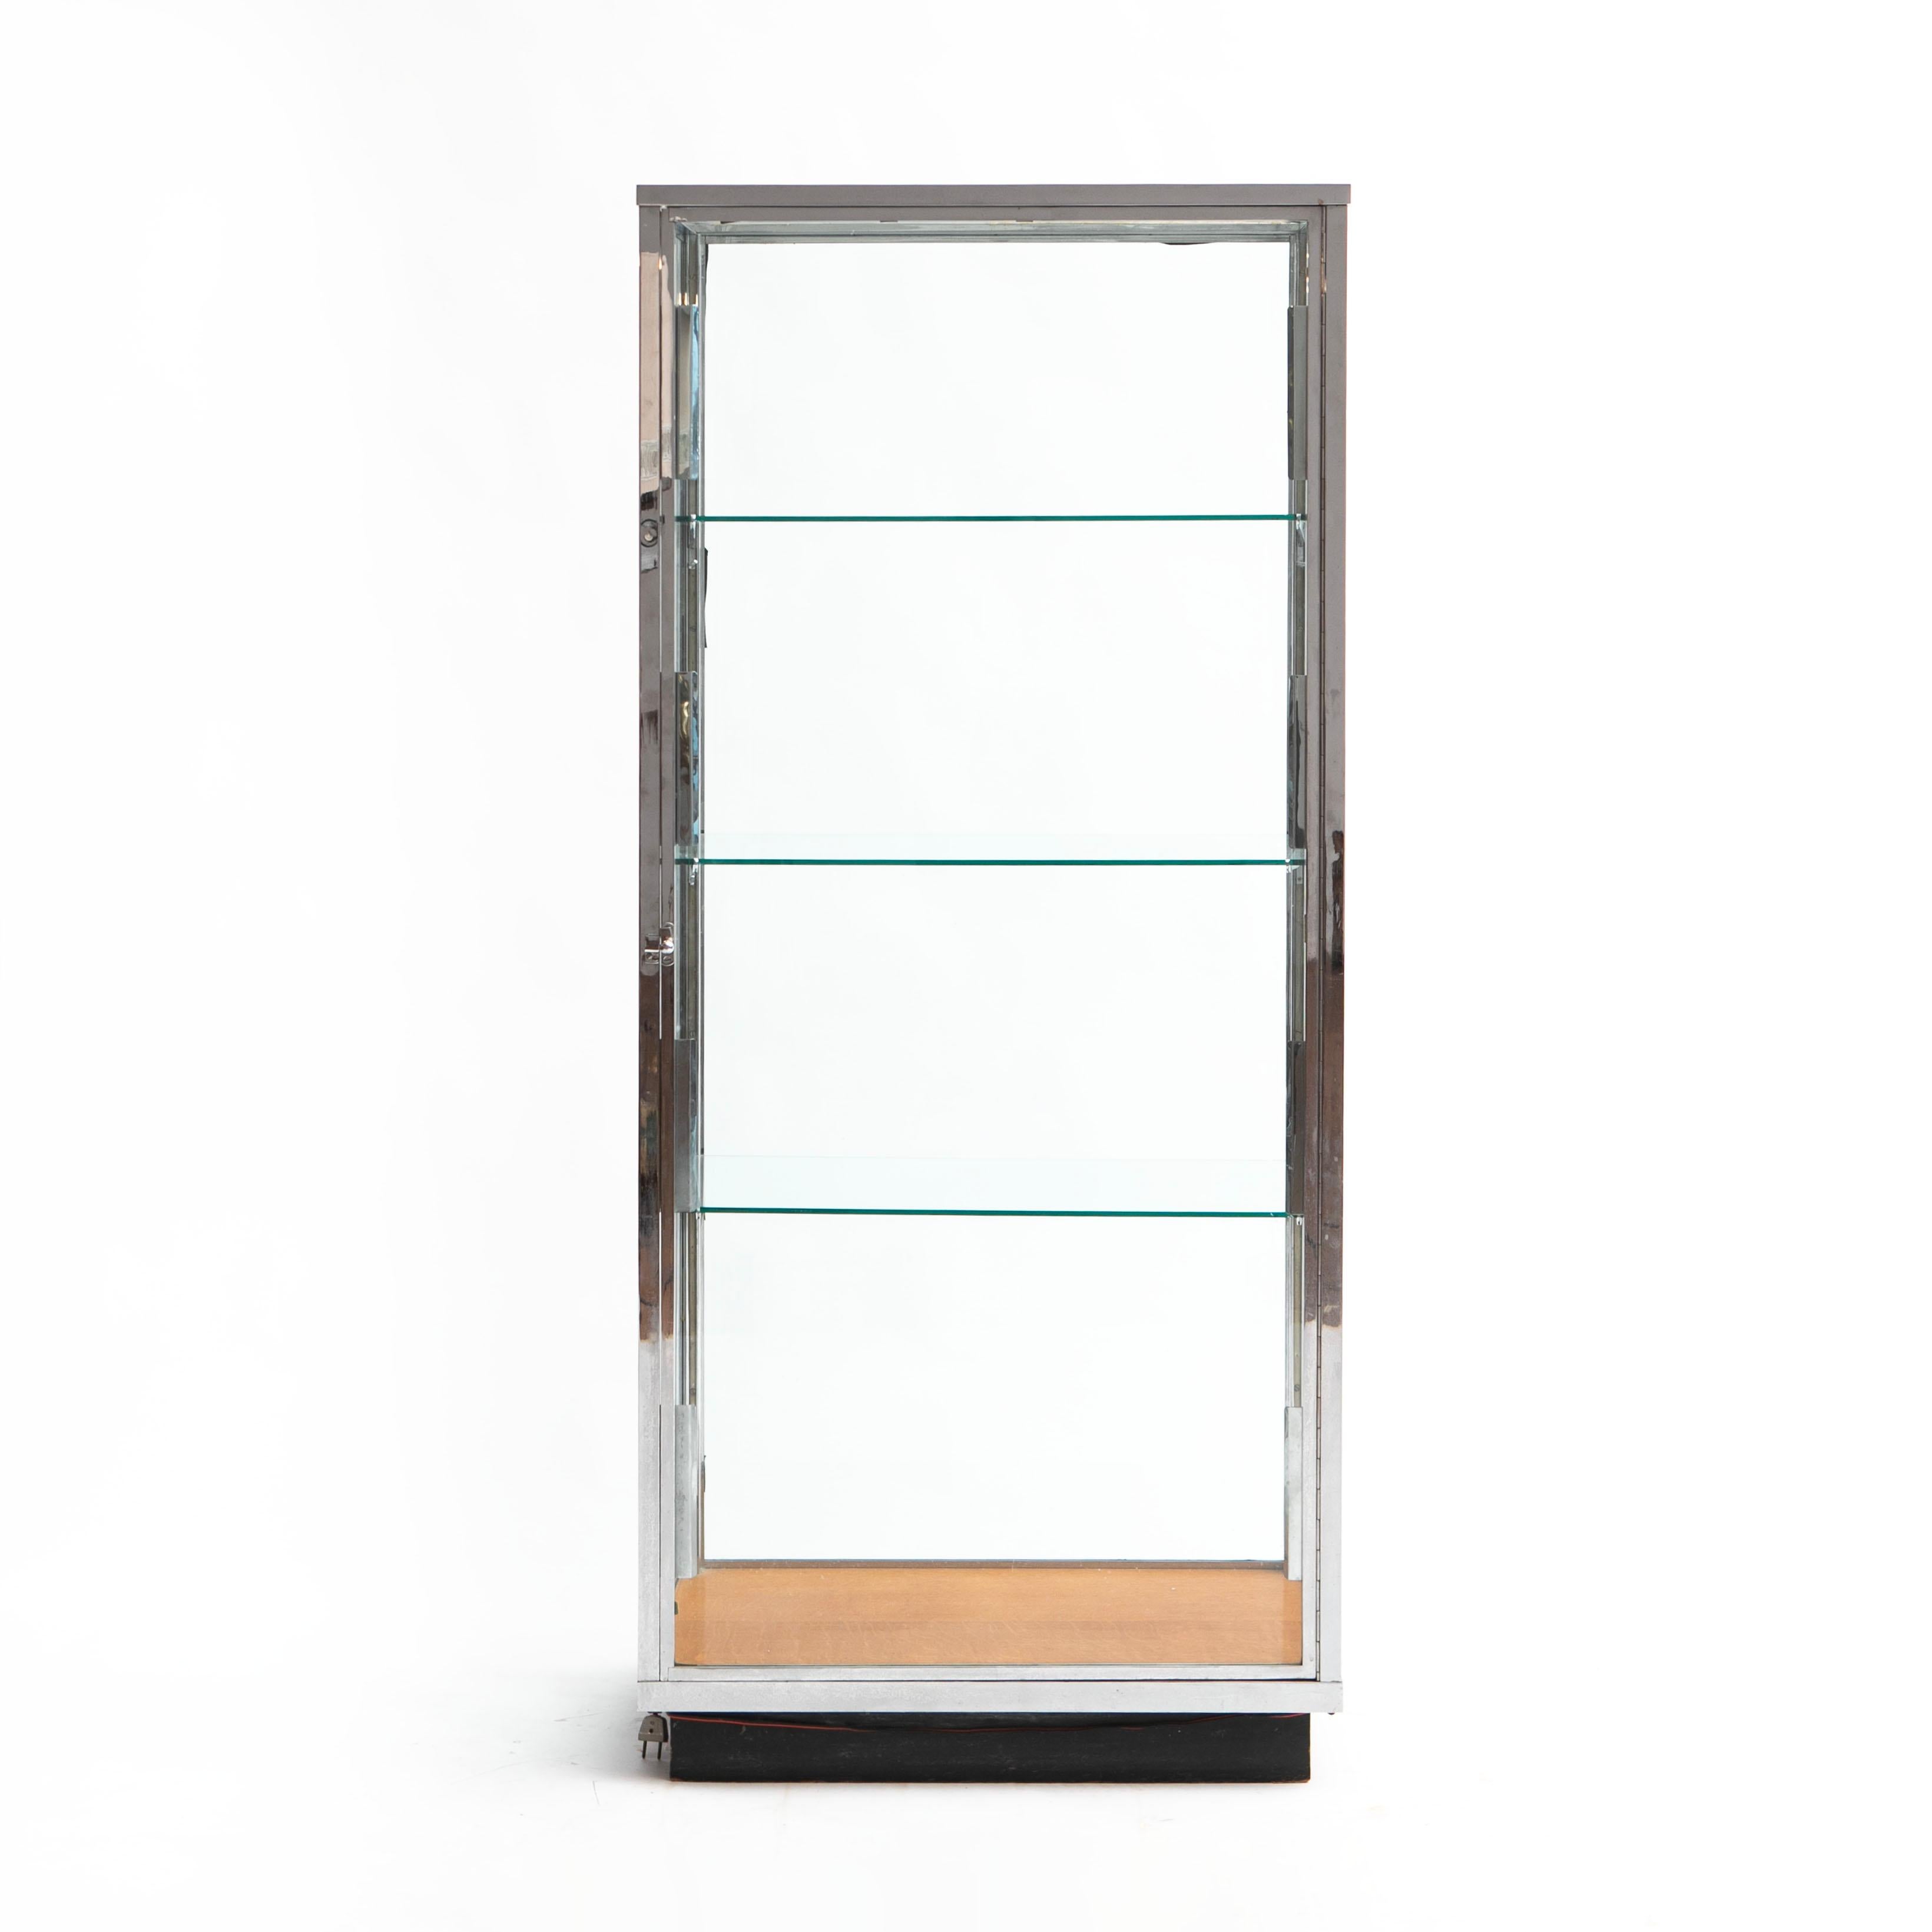 A large Danish art deco glass and chromed brass lighted display / storage cabinet.
Freestanding with glass on all four sides. Four glass shelves and a wooden 